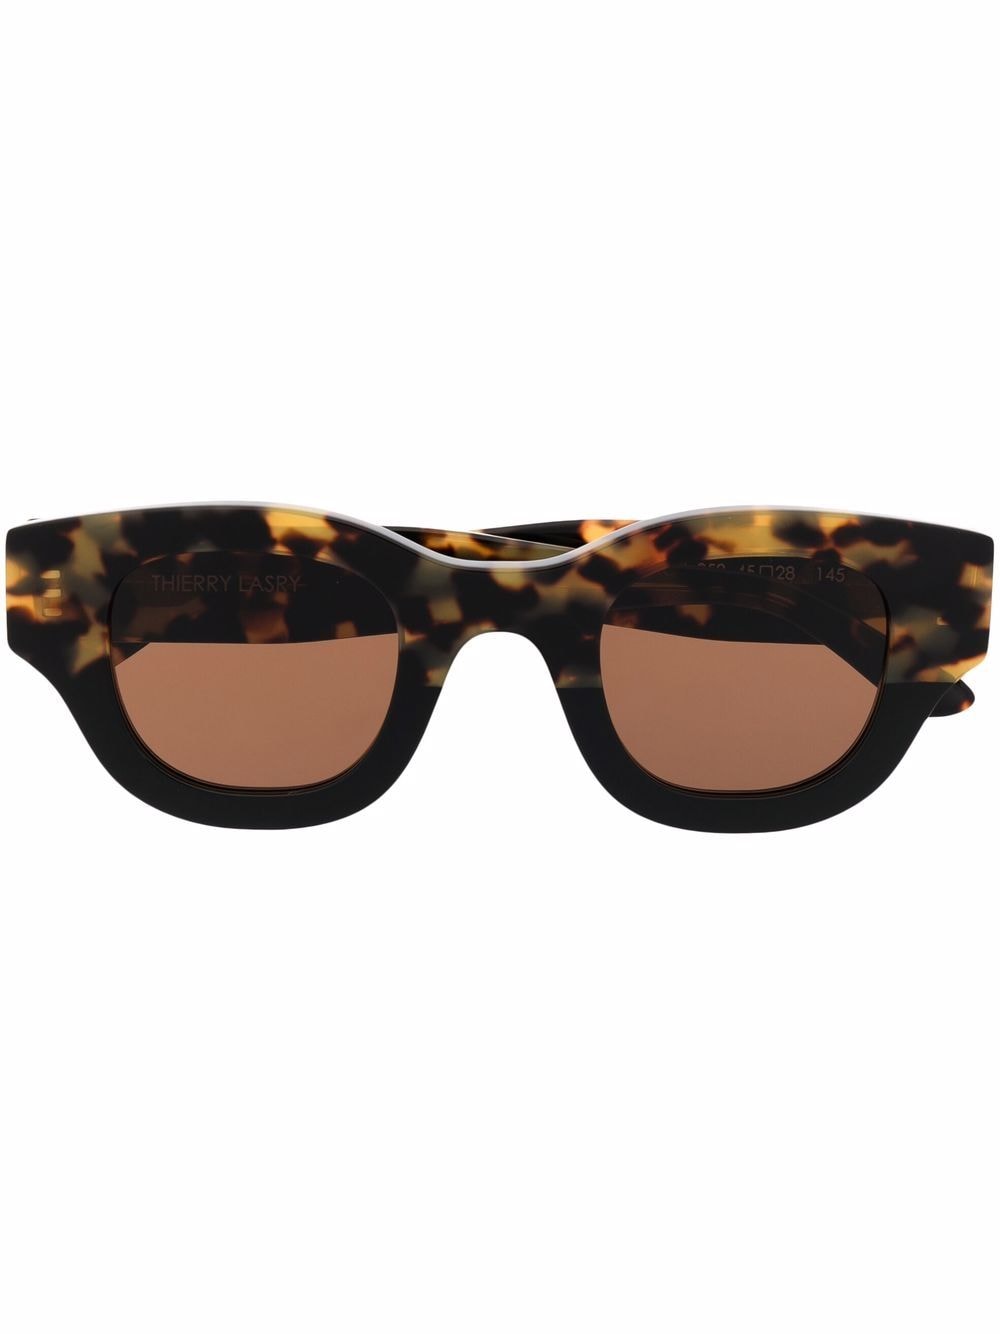 Thierry Lasry Autocracy tortoiseshell-effect sunglasses - Brown von Thierry Lasry